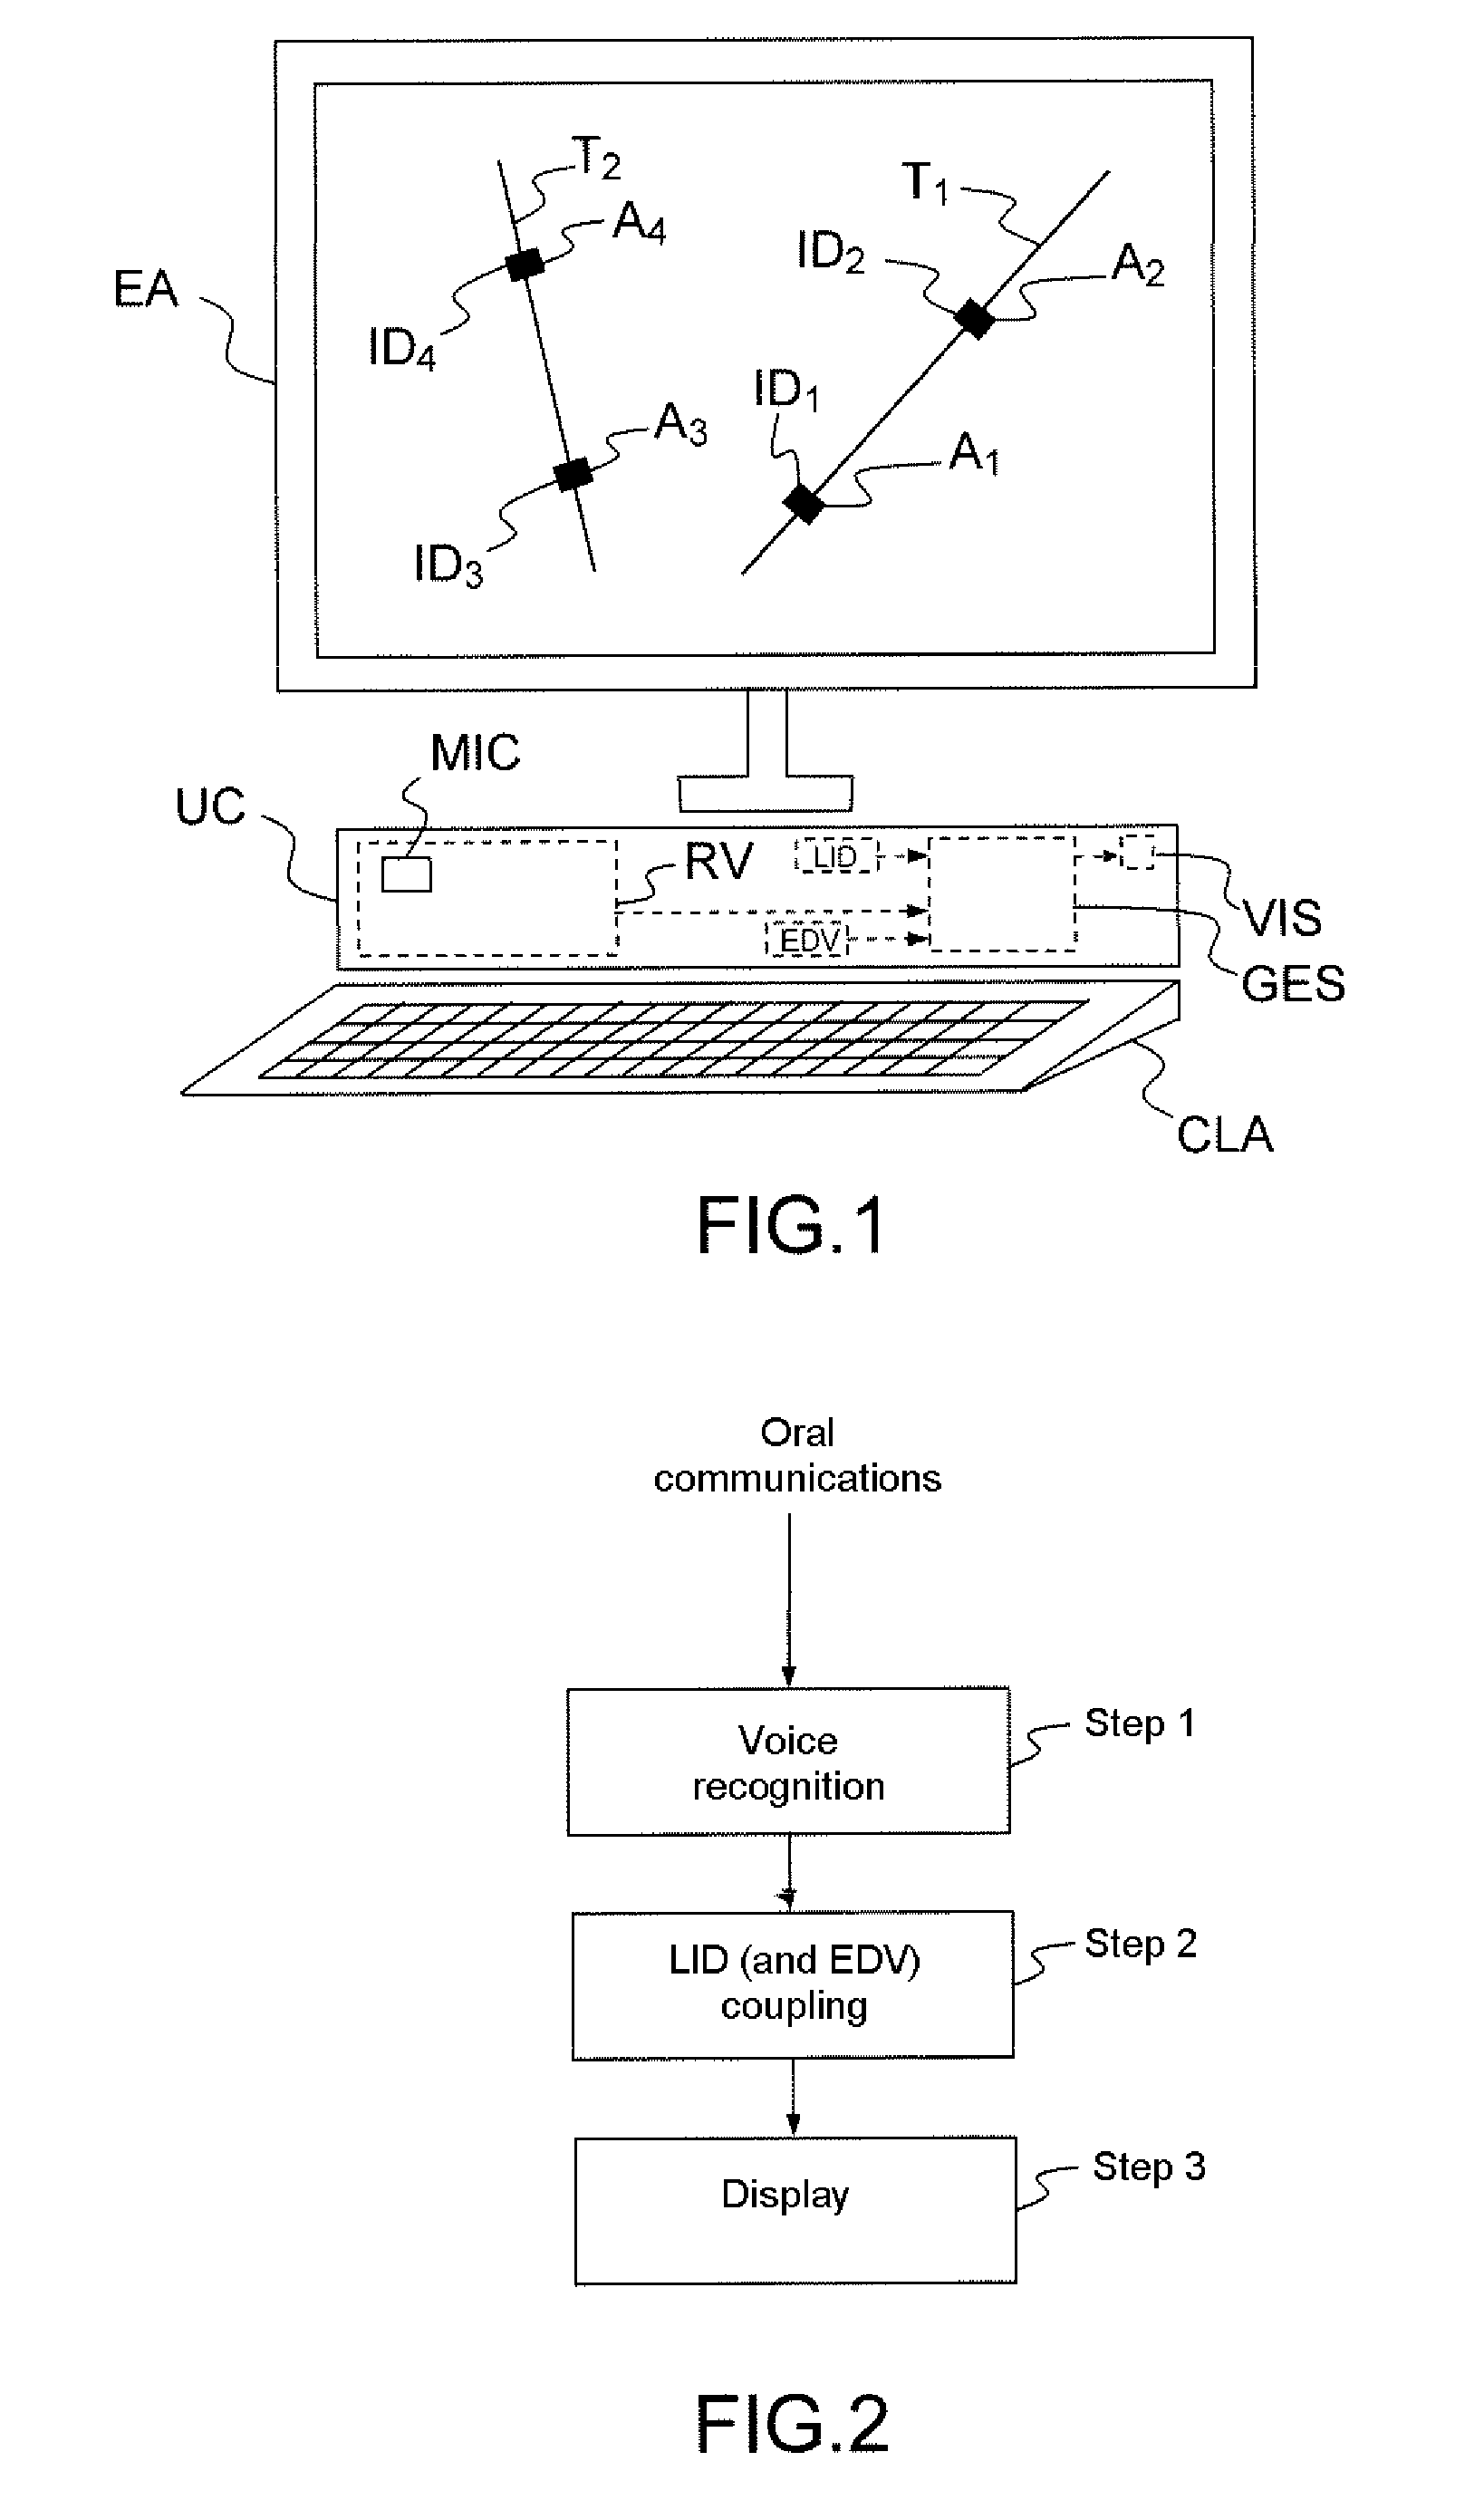 System and method for aiding the identification and control of aircraft that are present in an air sector to be monitored